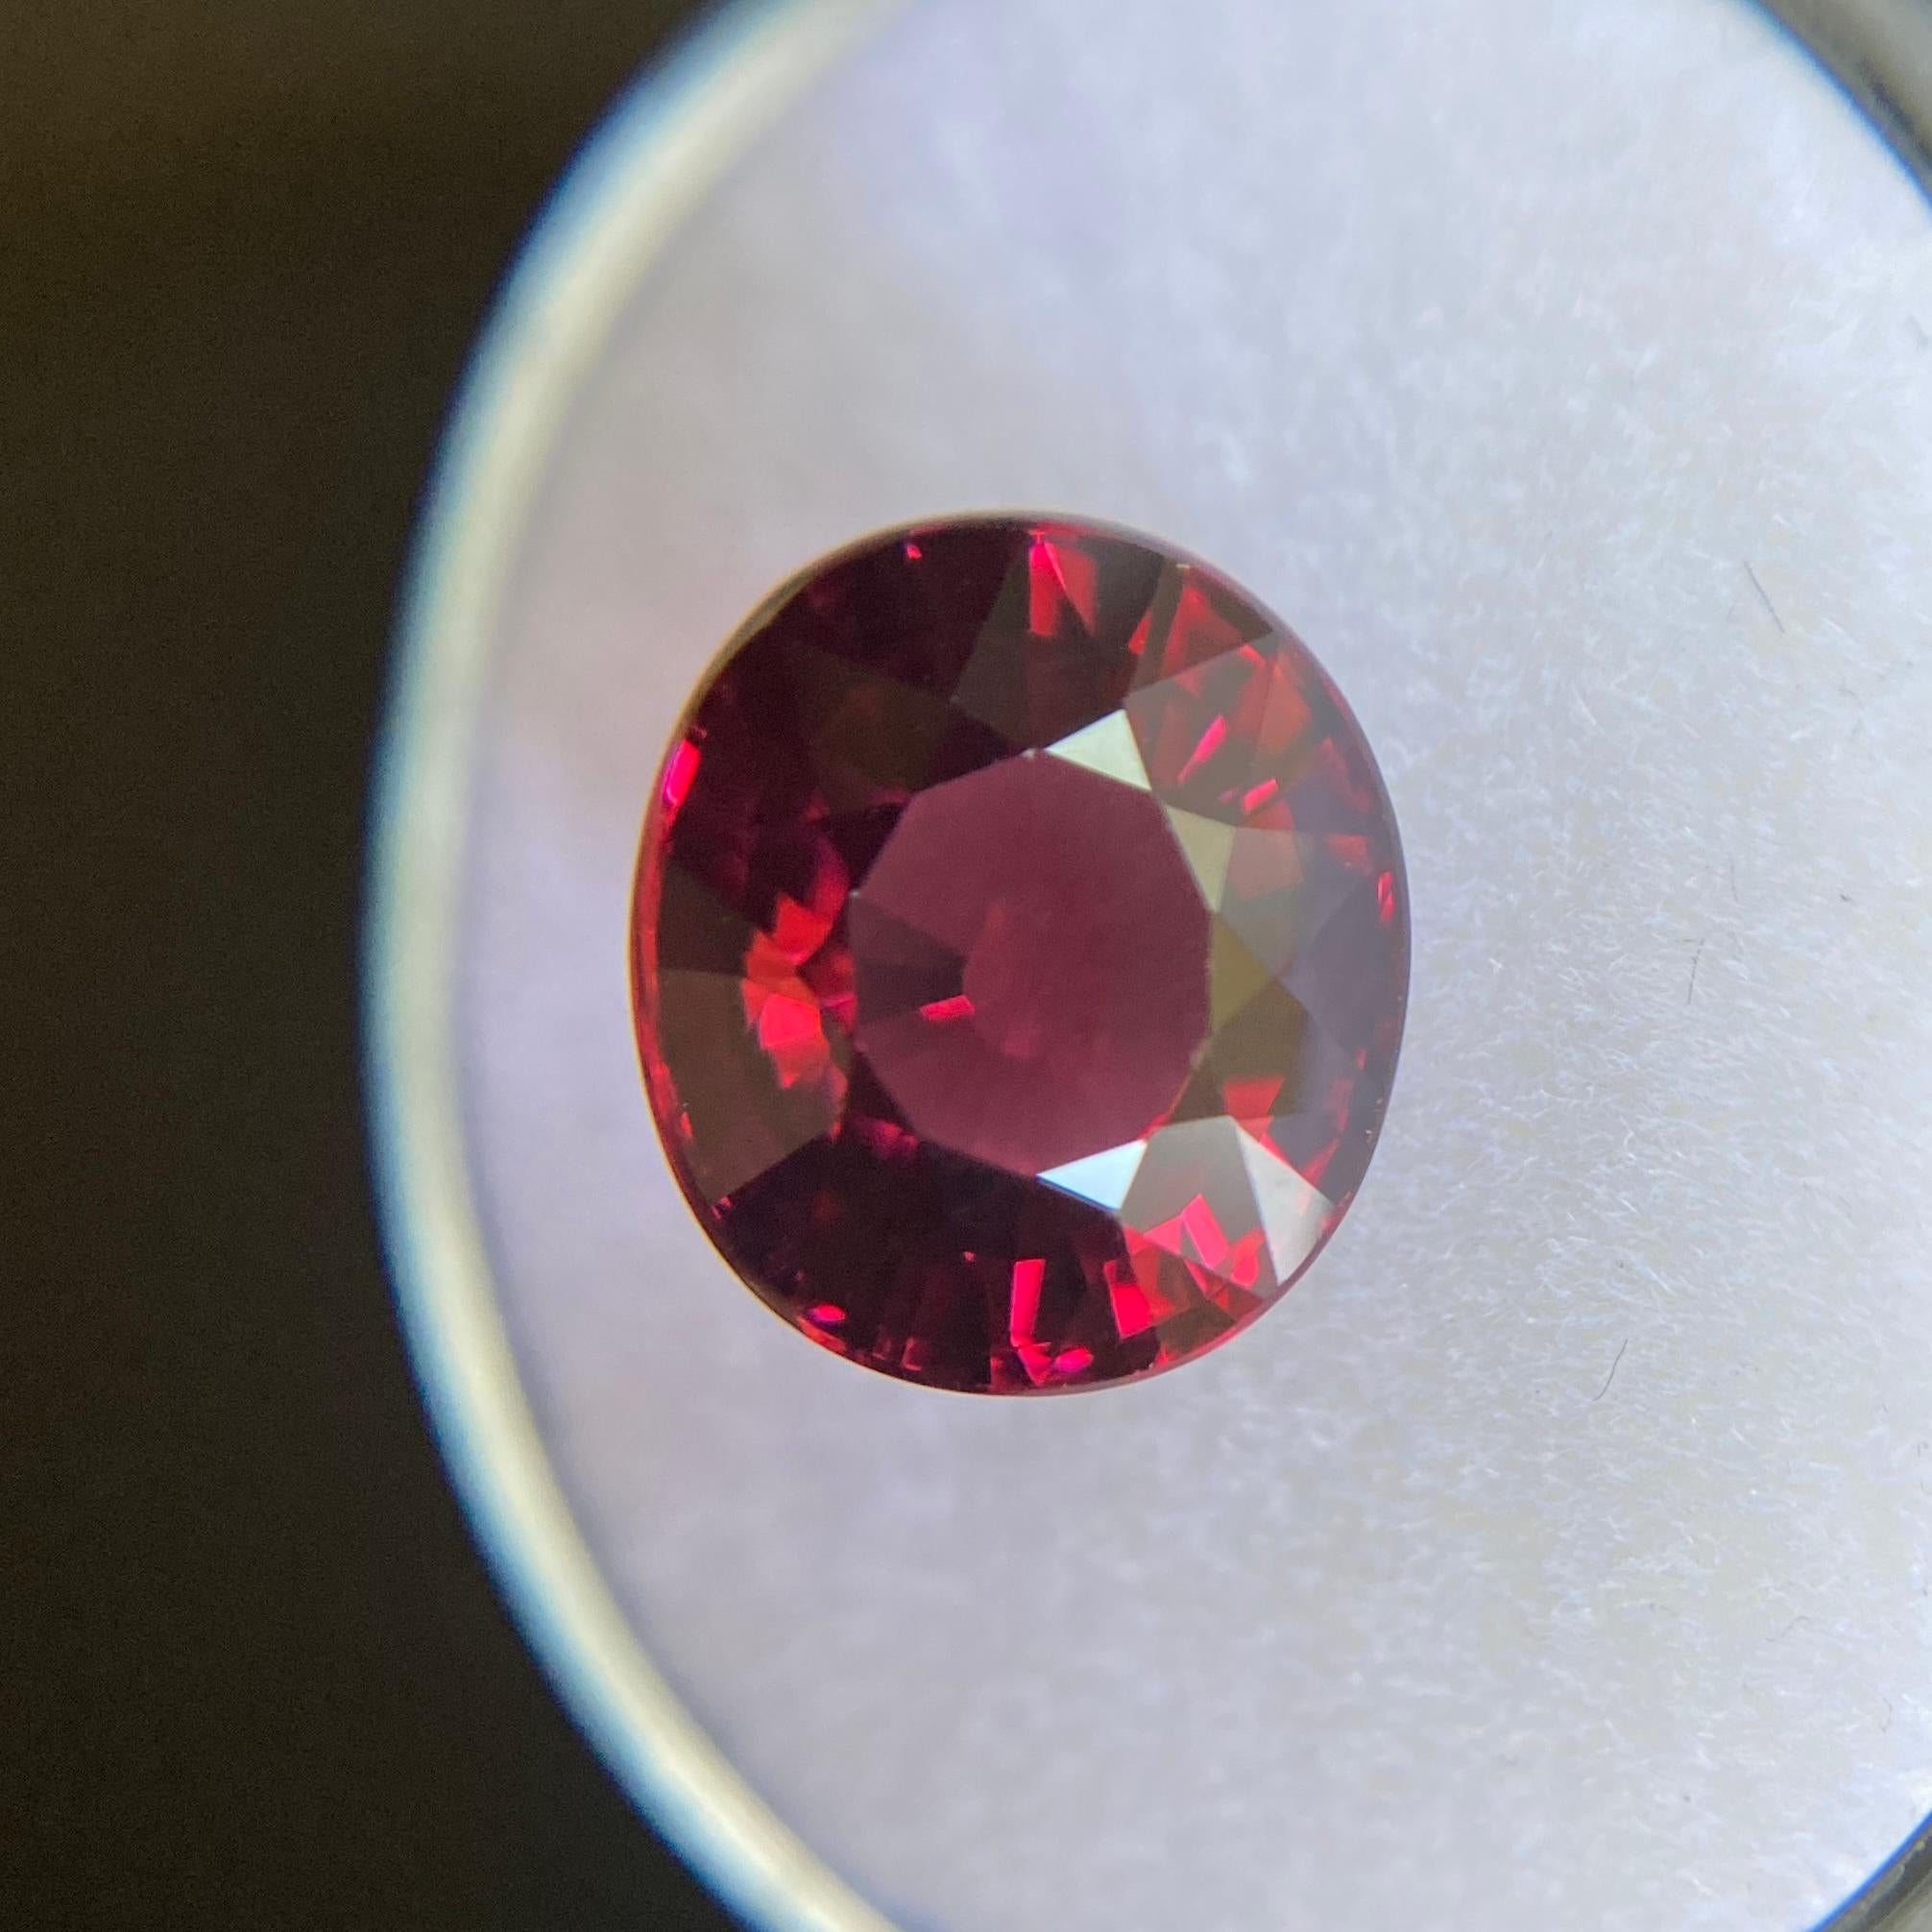 Fine Large Natural Vivid Red Rhodolite Garnet Gem.

5.02 Carat with a beautiful vivid purple red colour and excellent clarity, a very clean stone with only some very small natural inclusions visible when looking closely.

Also has an excellent oval